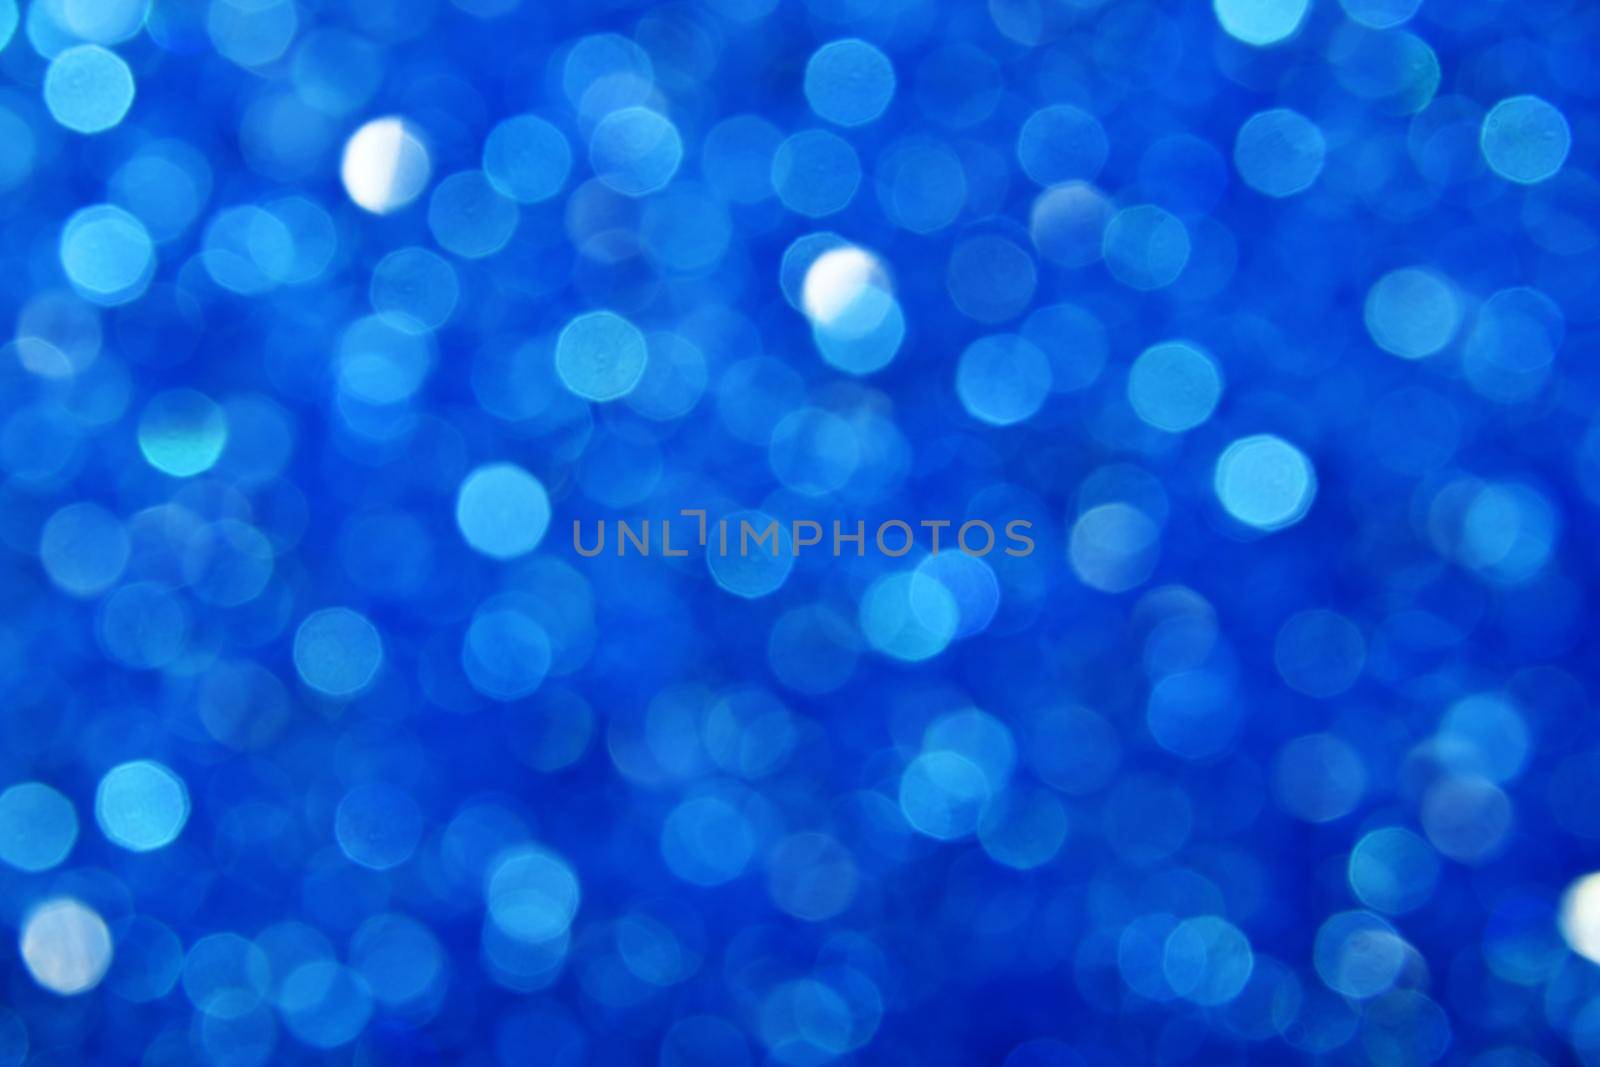 Abstract background of cold winter blue bokeh defocused blurred lights and glitter sparkles